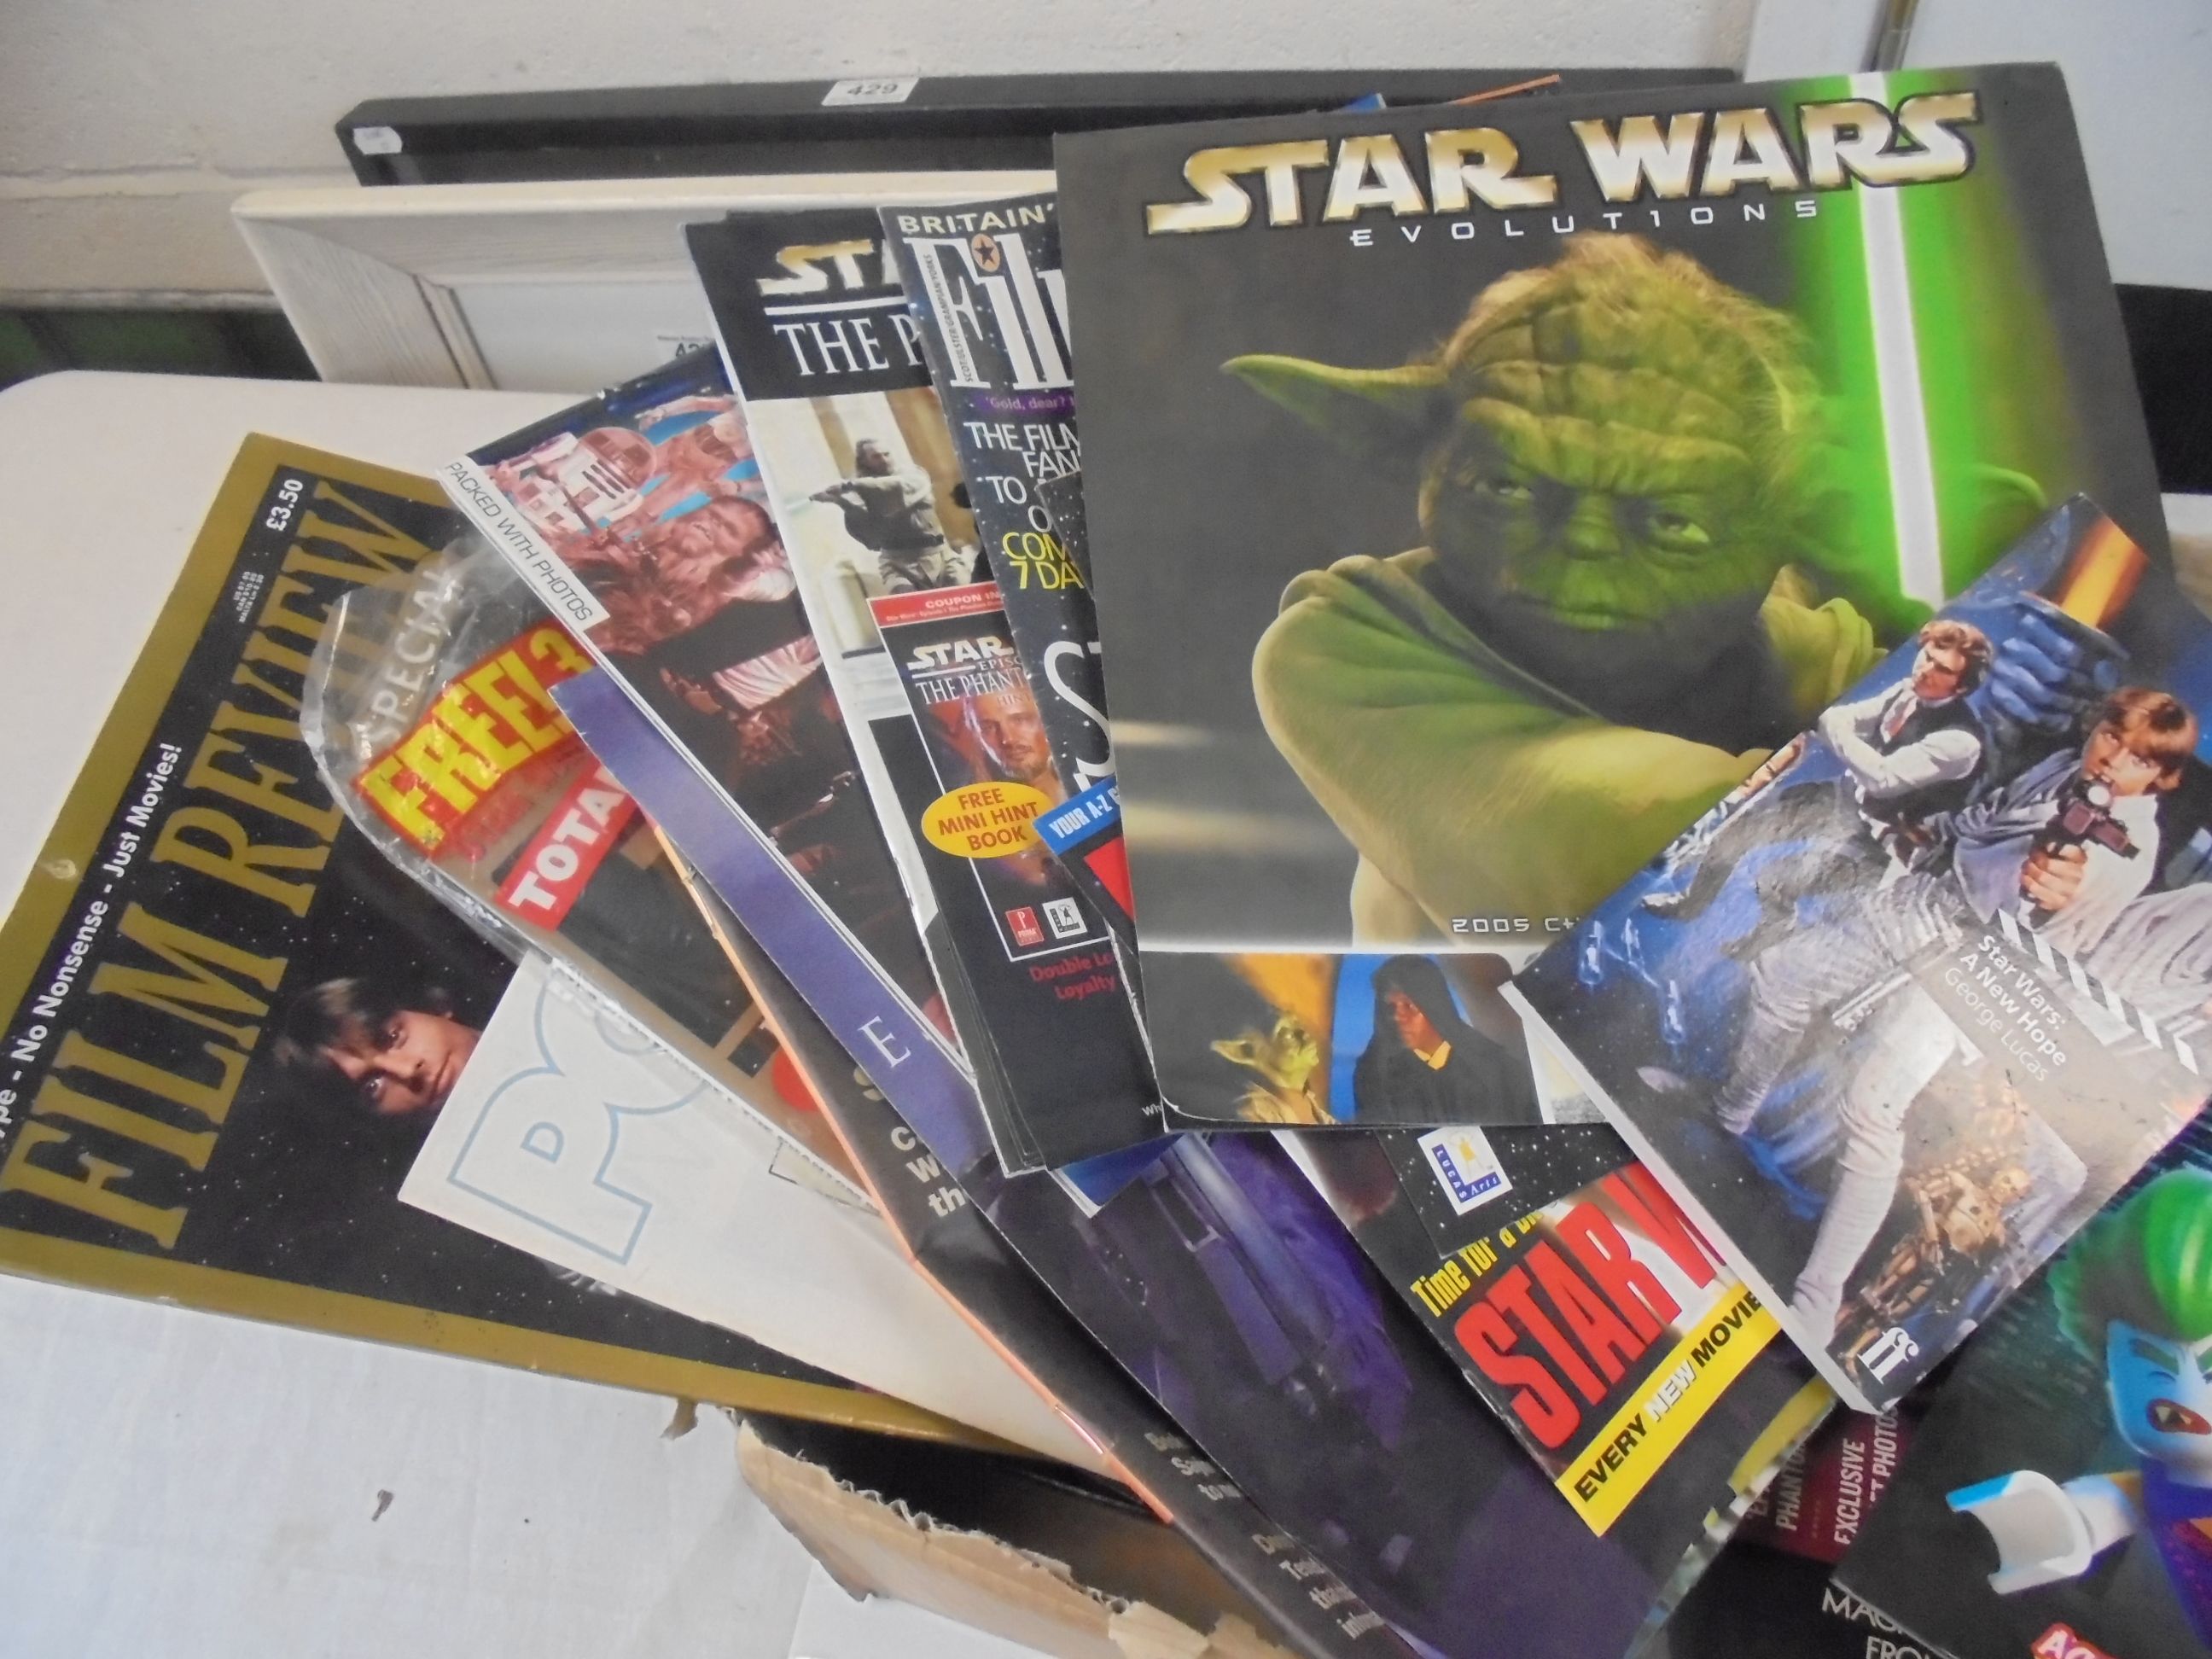 Star Wars - Collection of Various items including Books, Calendars, Magazines, Monoploy Cardboard - Image 2 of 3